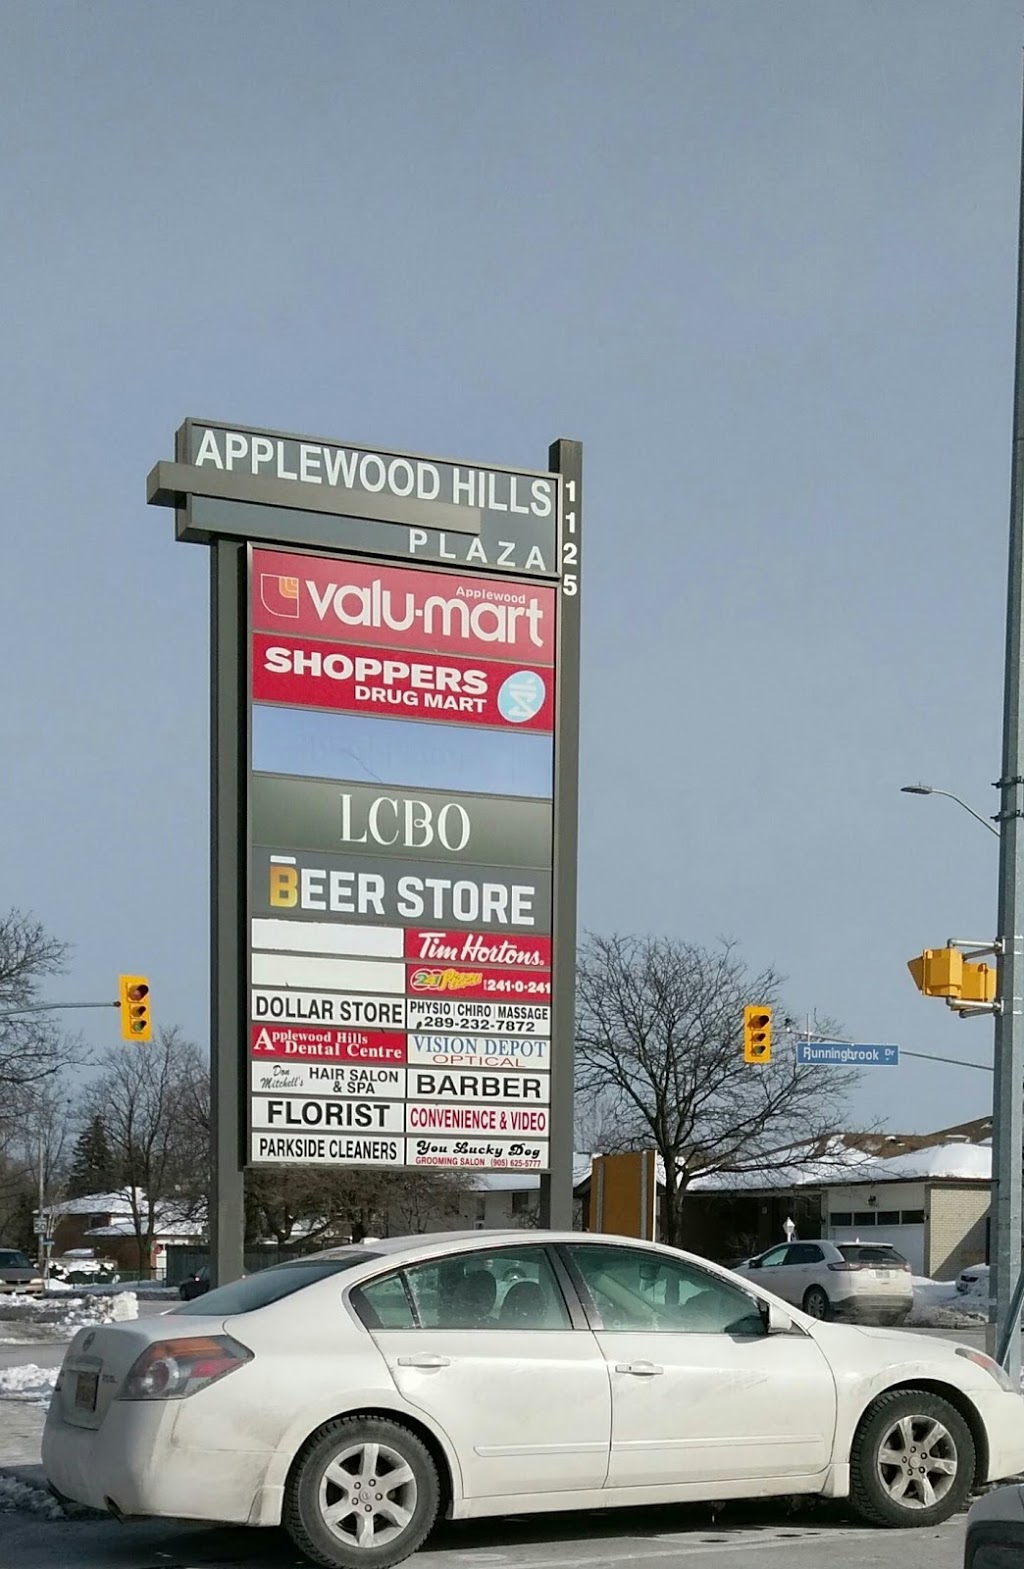 Applewood Hills Plaza 1125 BLOOR ST E, Mississauga, ON L4Y 2N6, Canada